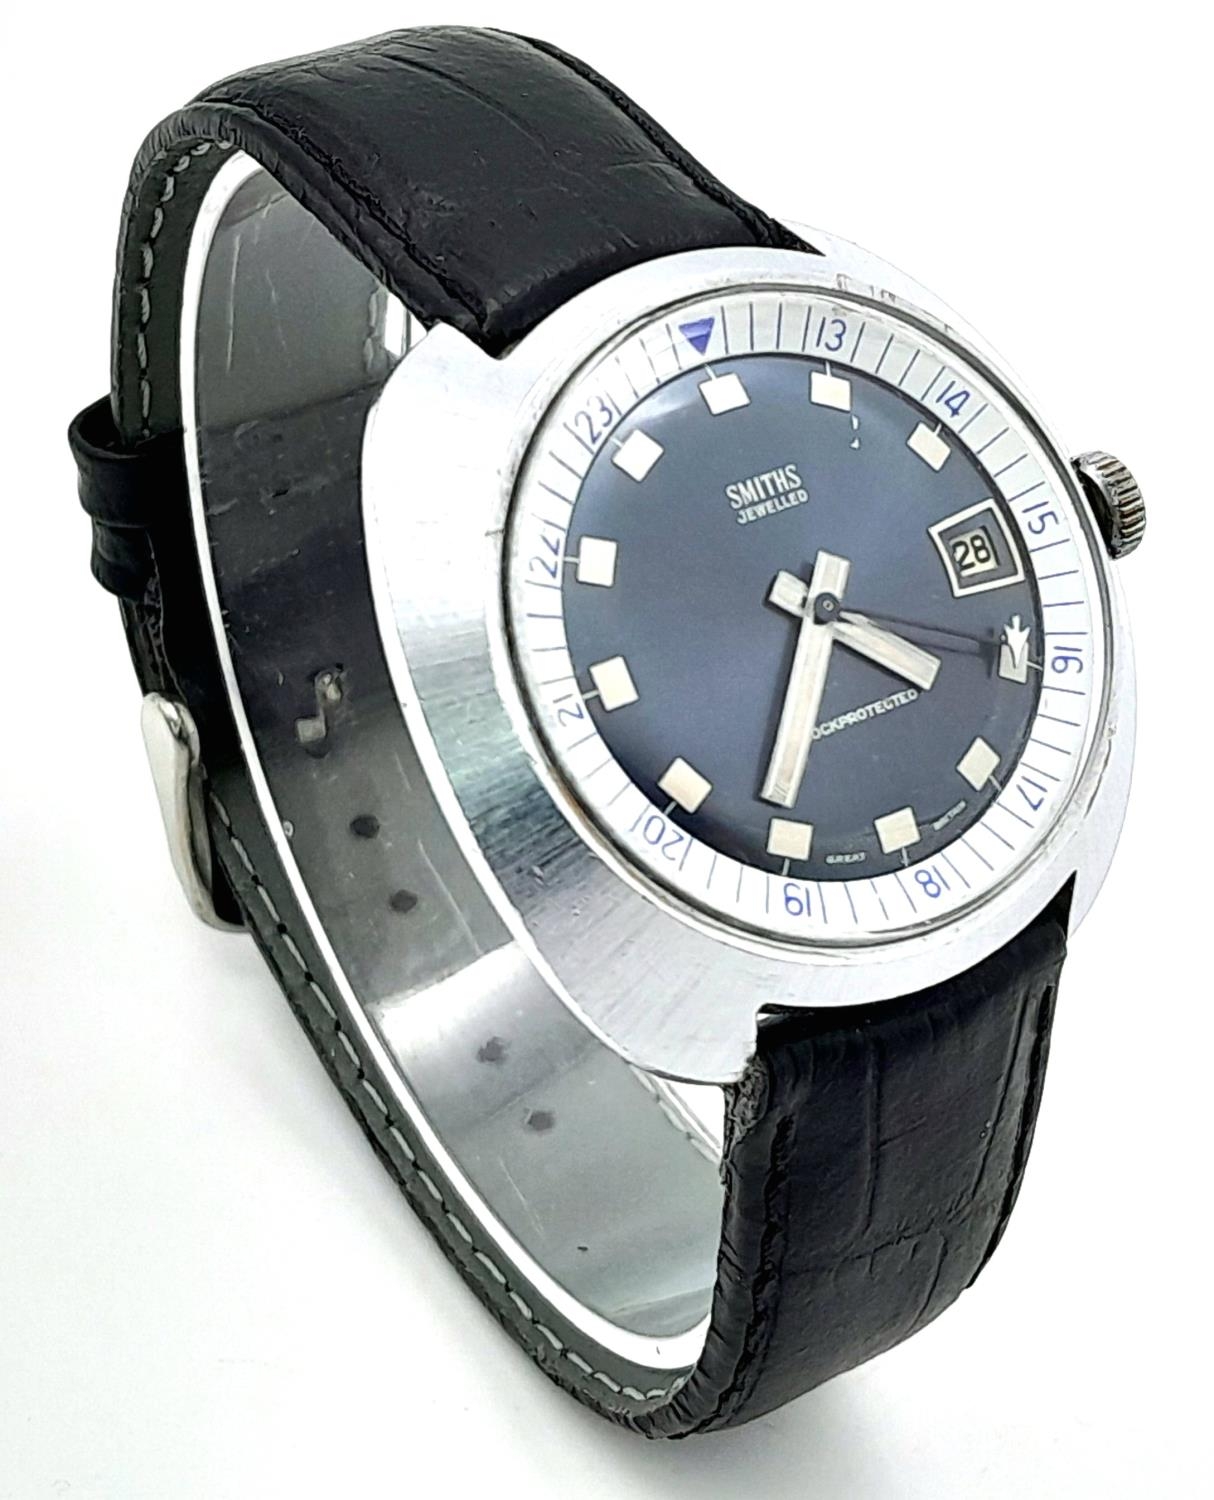 A Vintage Smiths Mechanical Gents Watch. Black leather strap. Stainless steel case - 42mm. Blue dial - Image 3 of 6